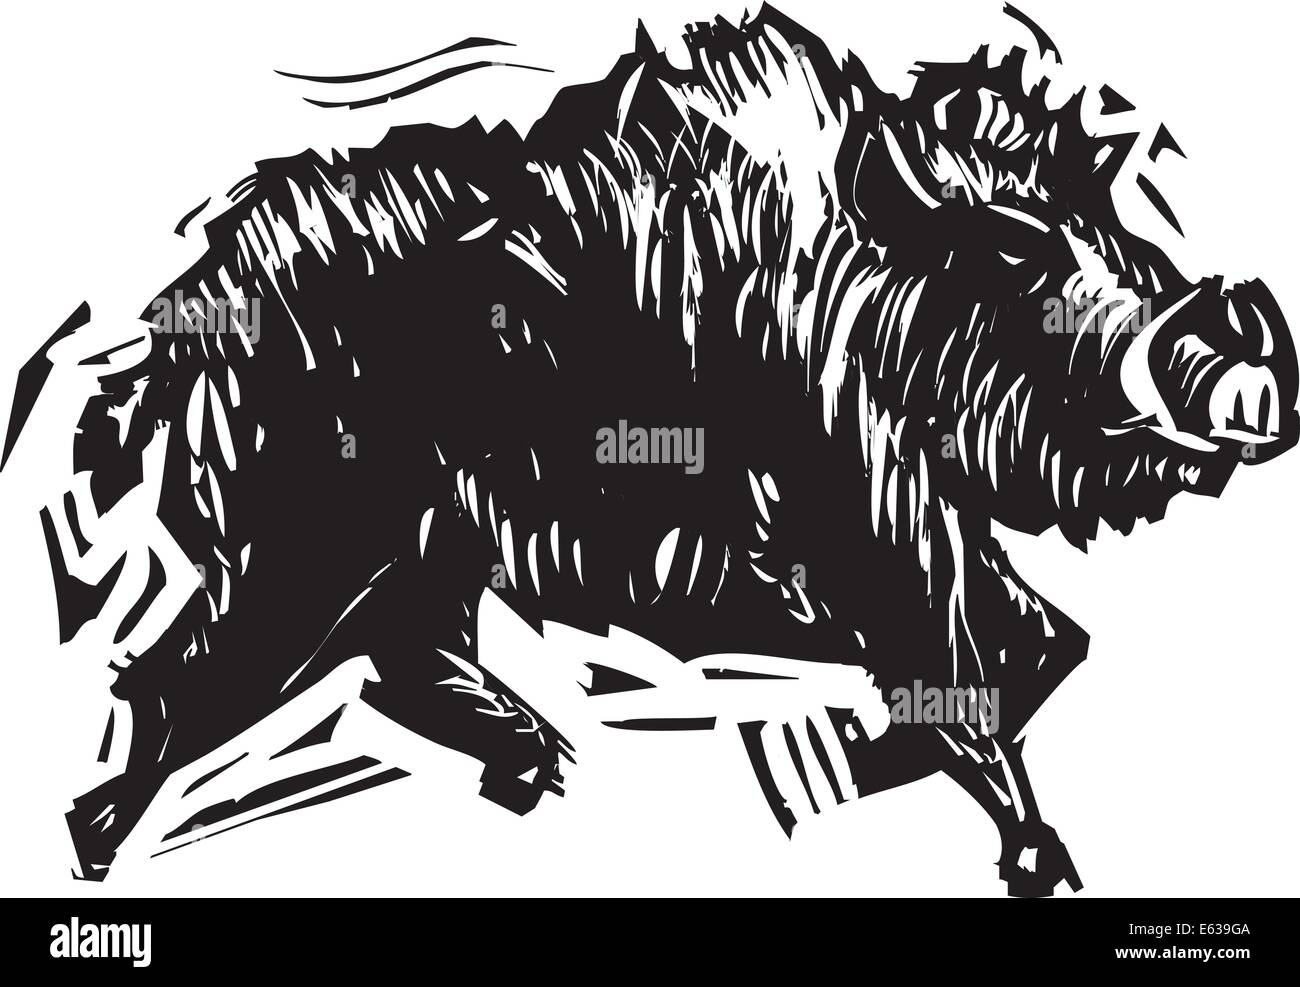 Woodcut style image of a wild boar with tusks. Stock Vector